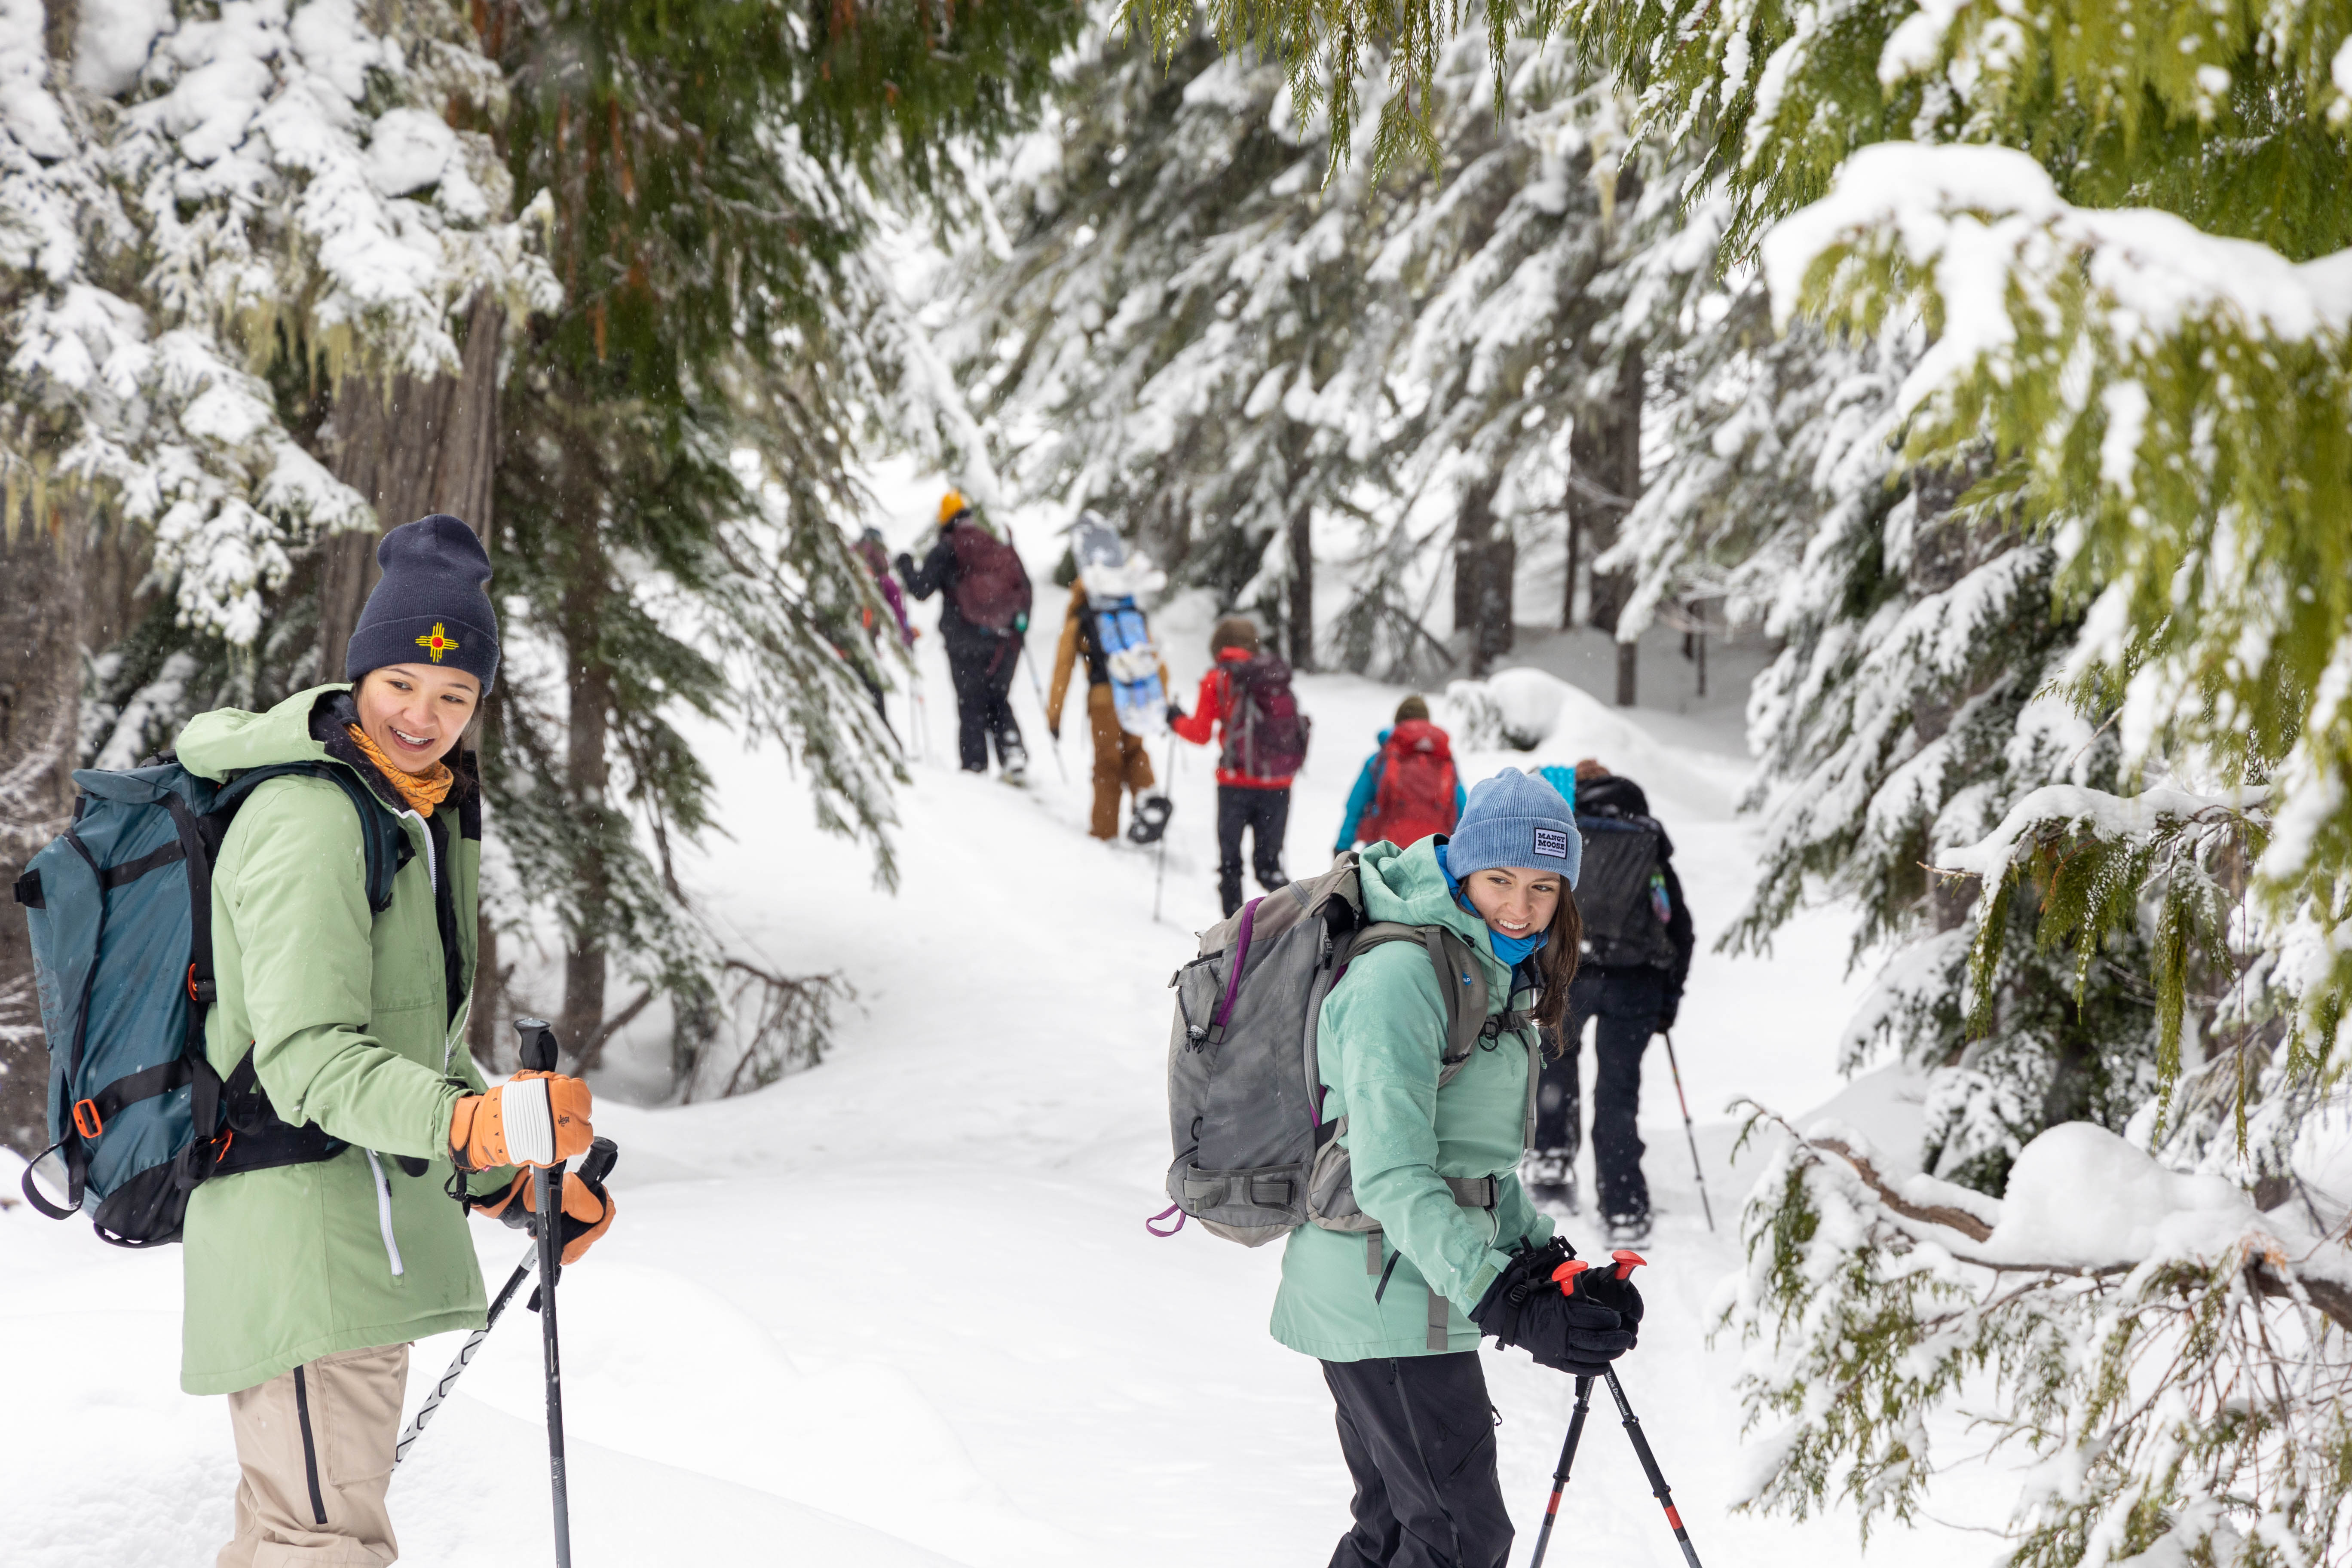 A group of youth ski together in snowy woods